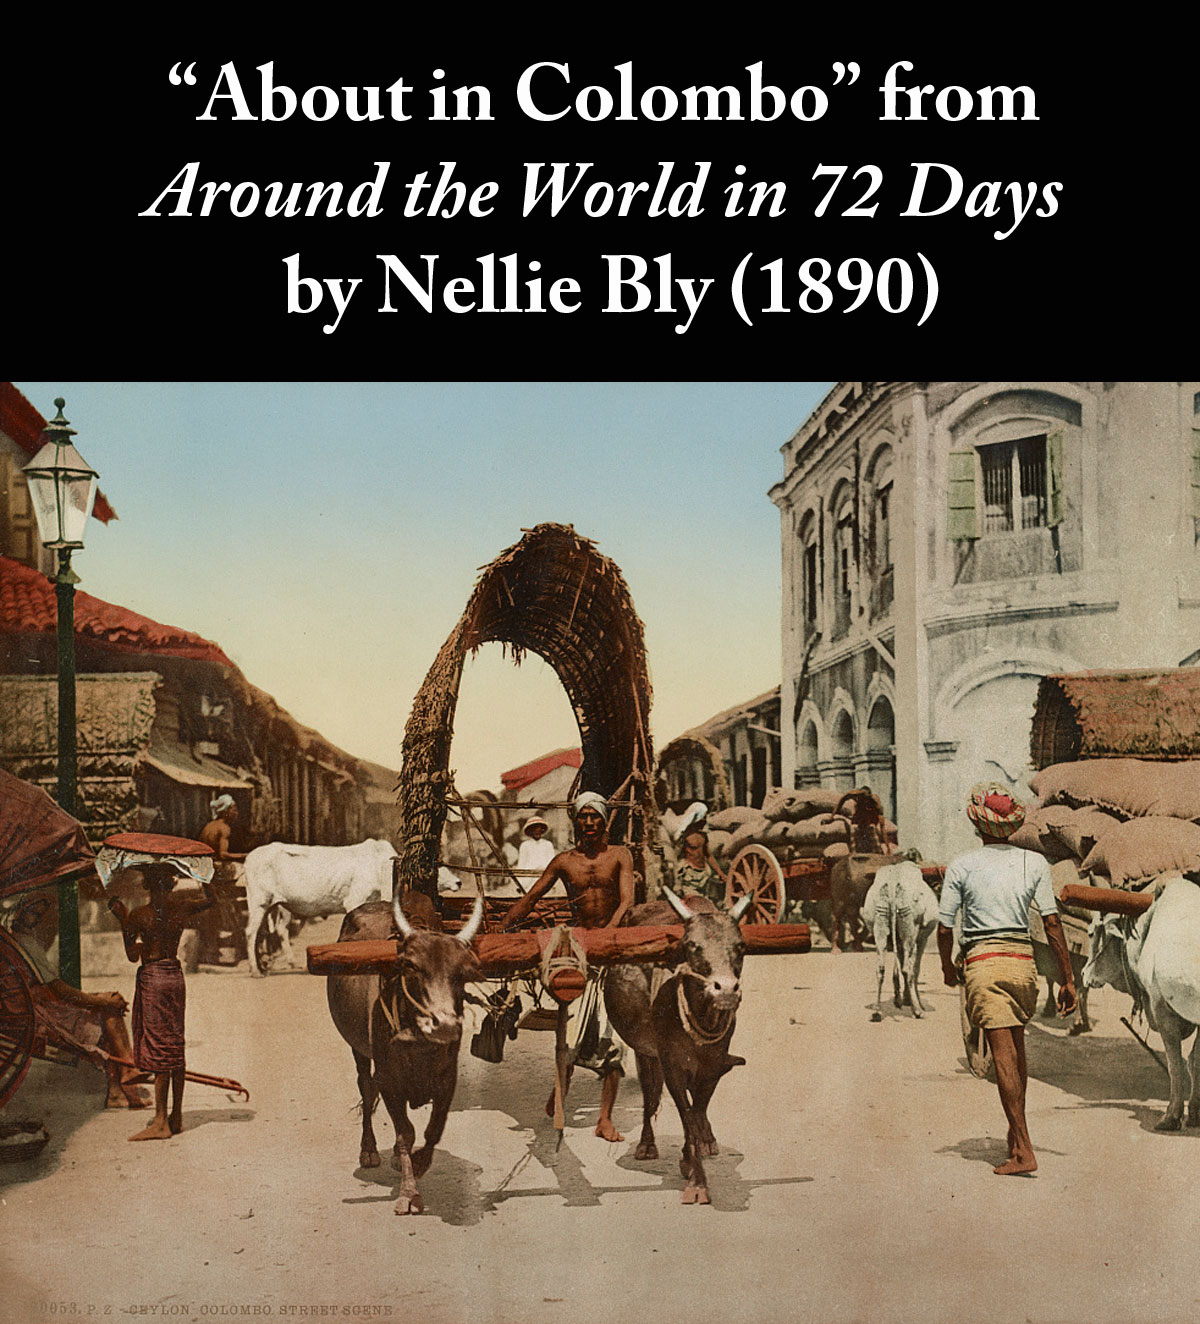 About in Colombo from Around the World in 72 Days by Nellie Bly (1890)